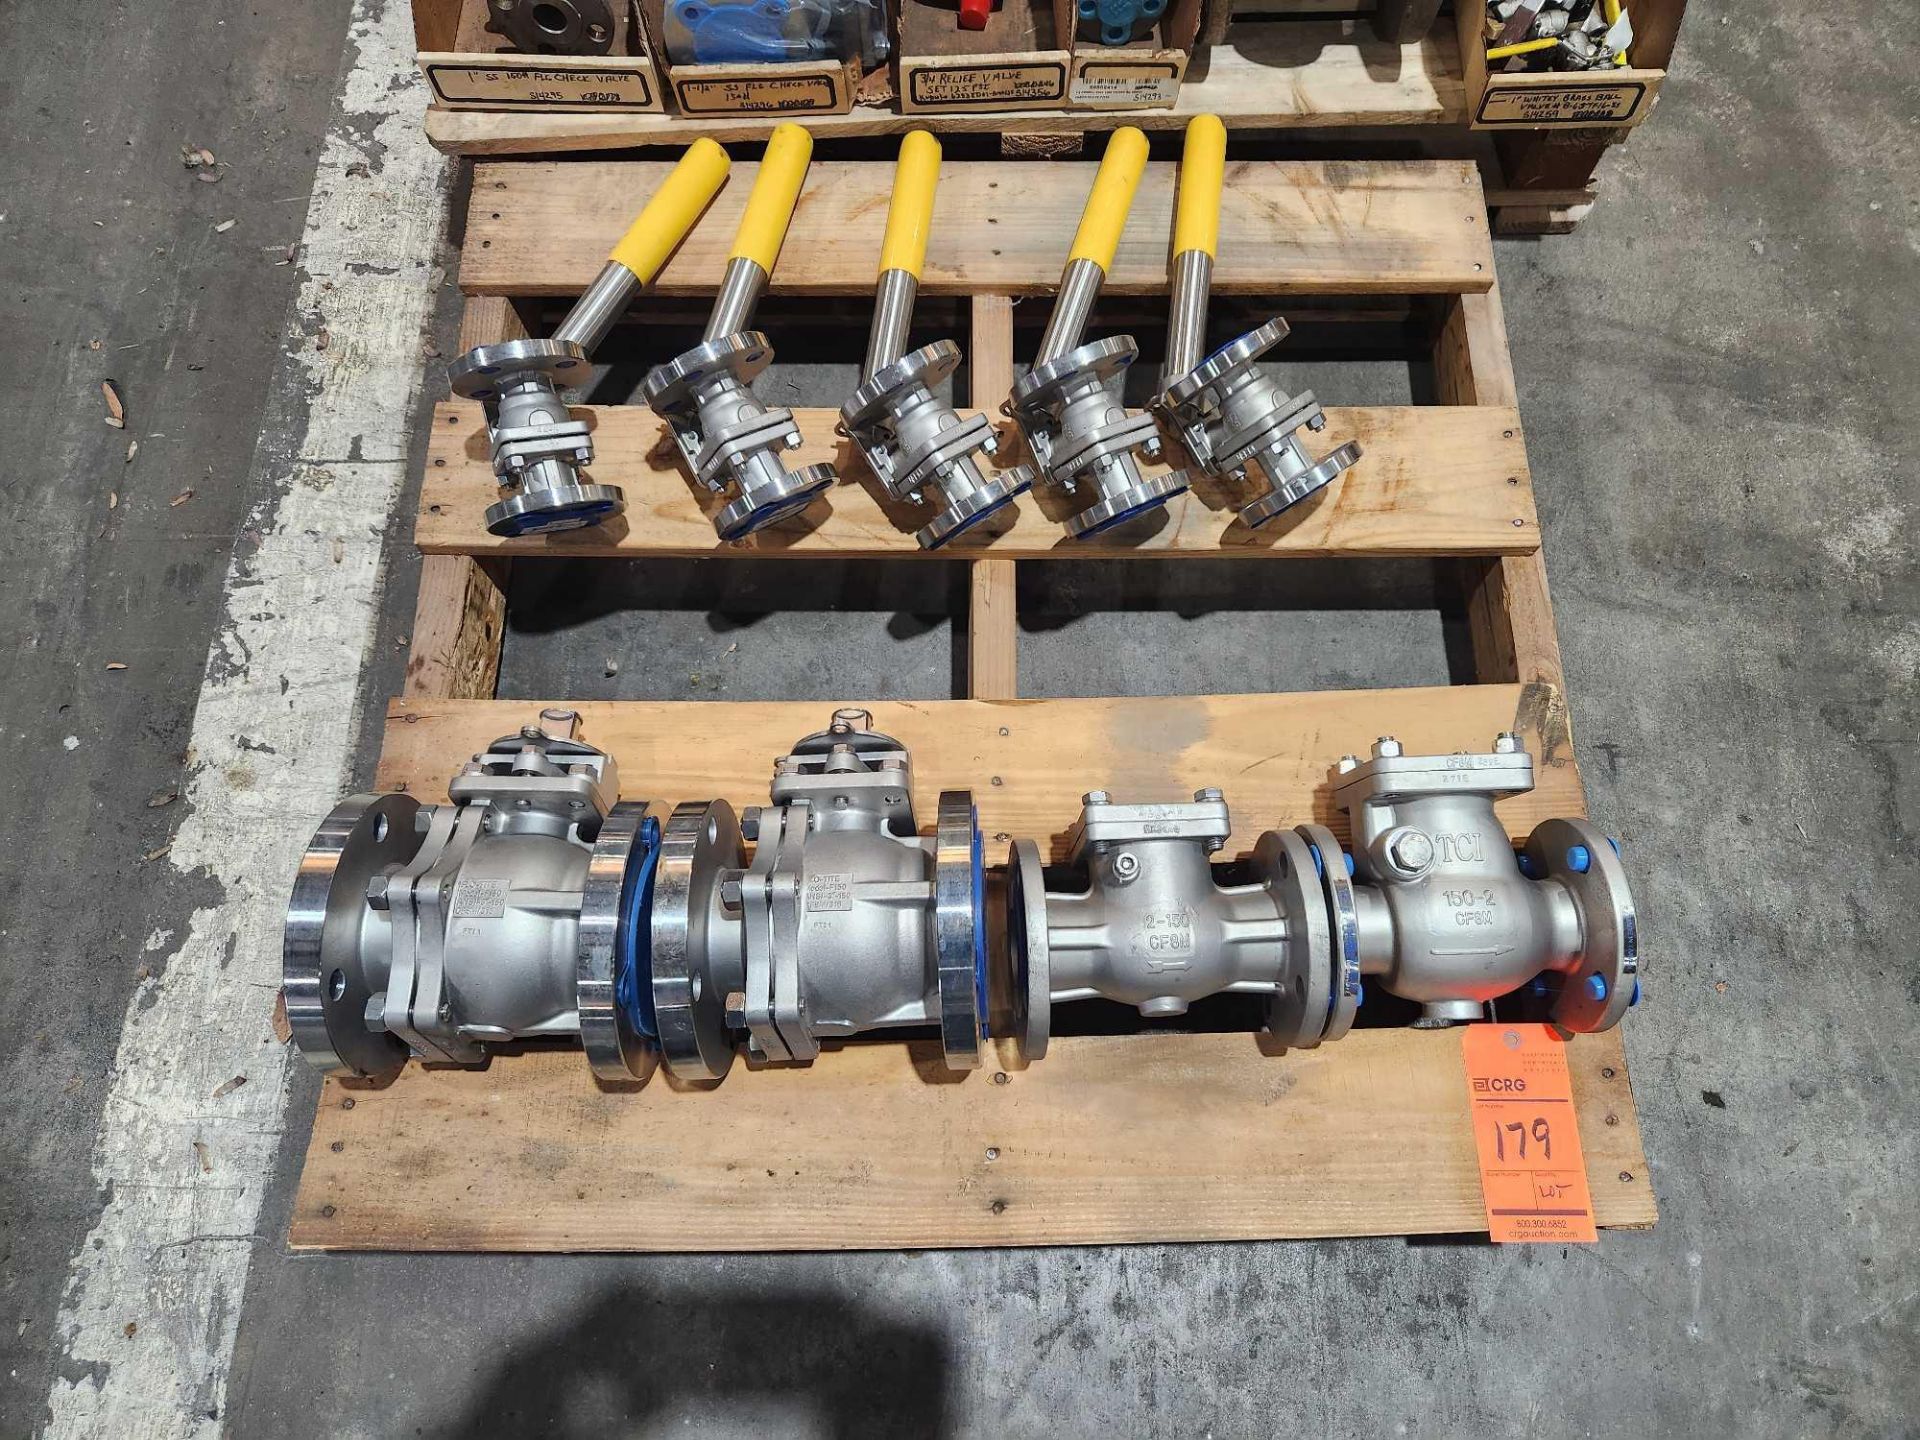 Lot asst stainless steel valves, contents of 3 pallets (WAREHOUSE) - Image 2 of 4